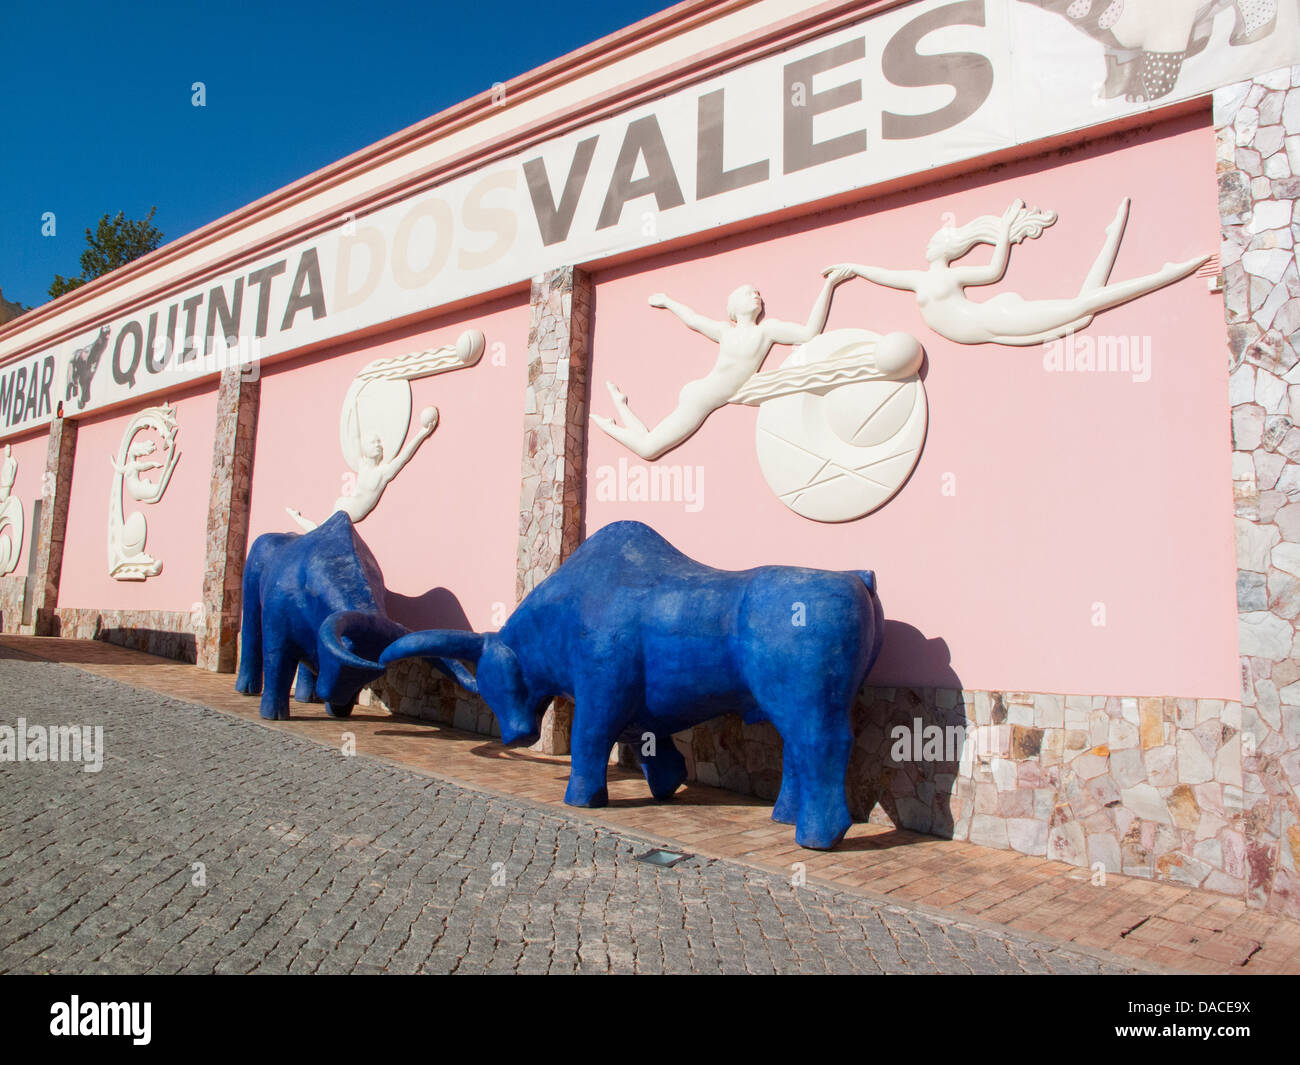 Vineyard winery building of Quinta dos Vales in the Algarve, Portugal Stock Photo